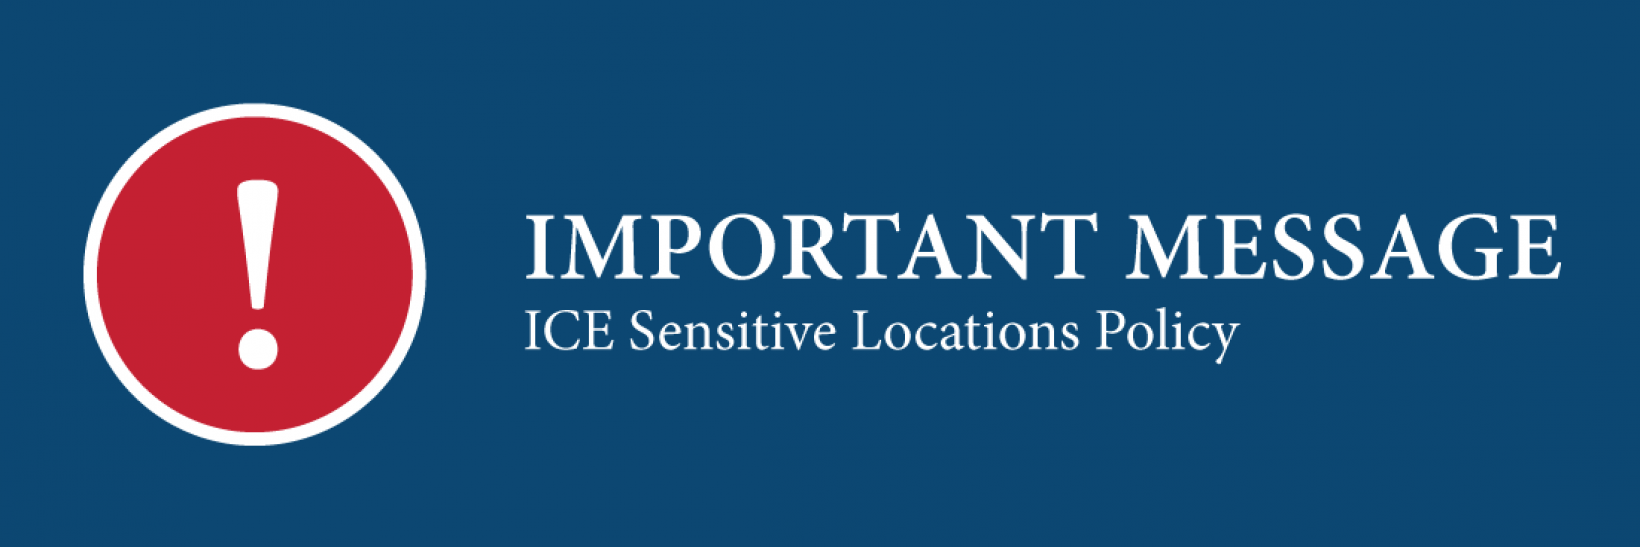 Important Message: ICE Sensitive Locations Policy